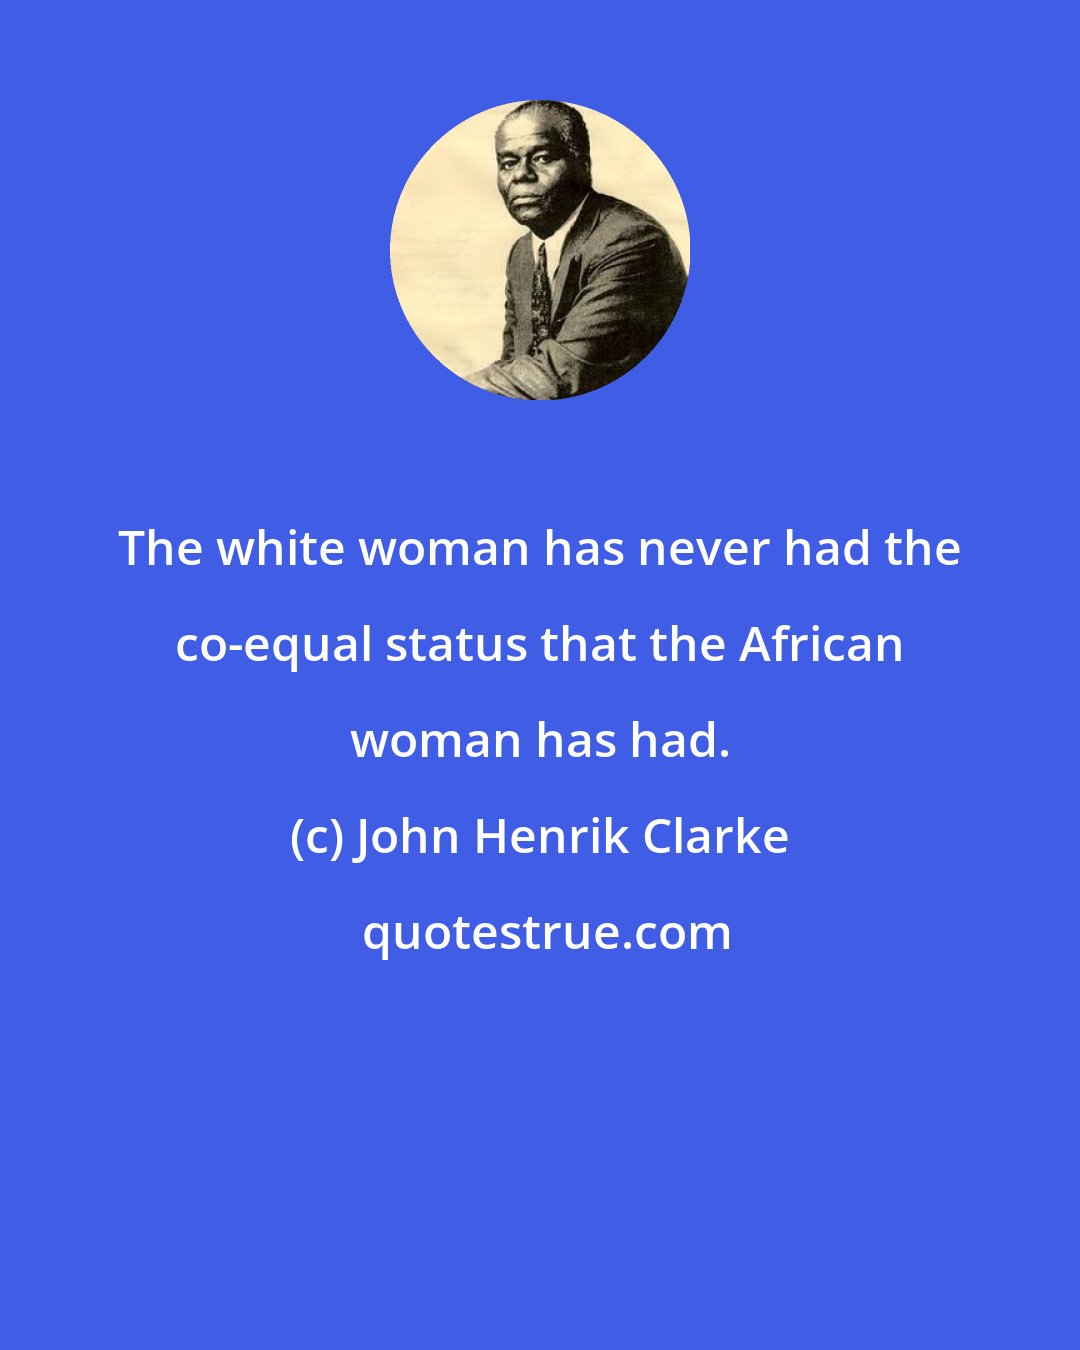 John Henrik Clarke: The white woman has never had the co-equal status that the African woman has had.